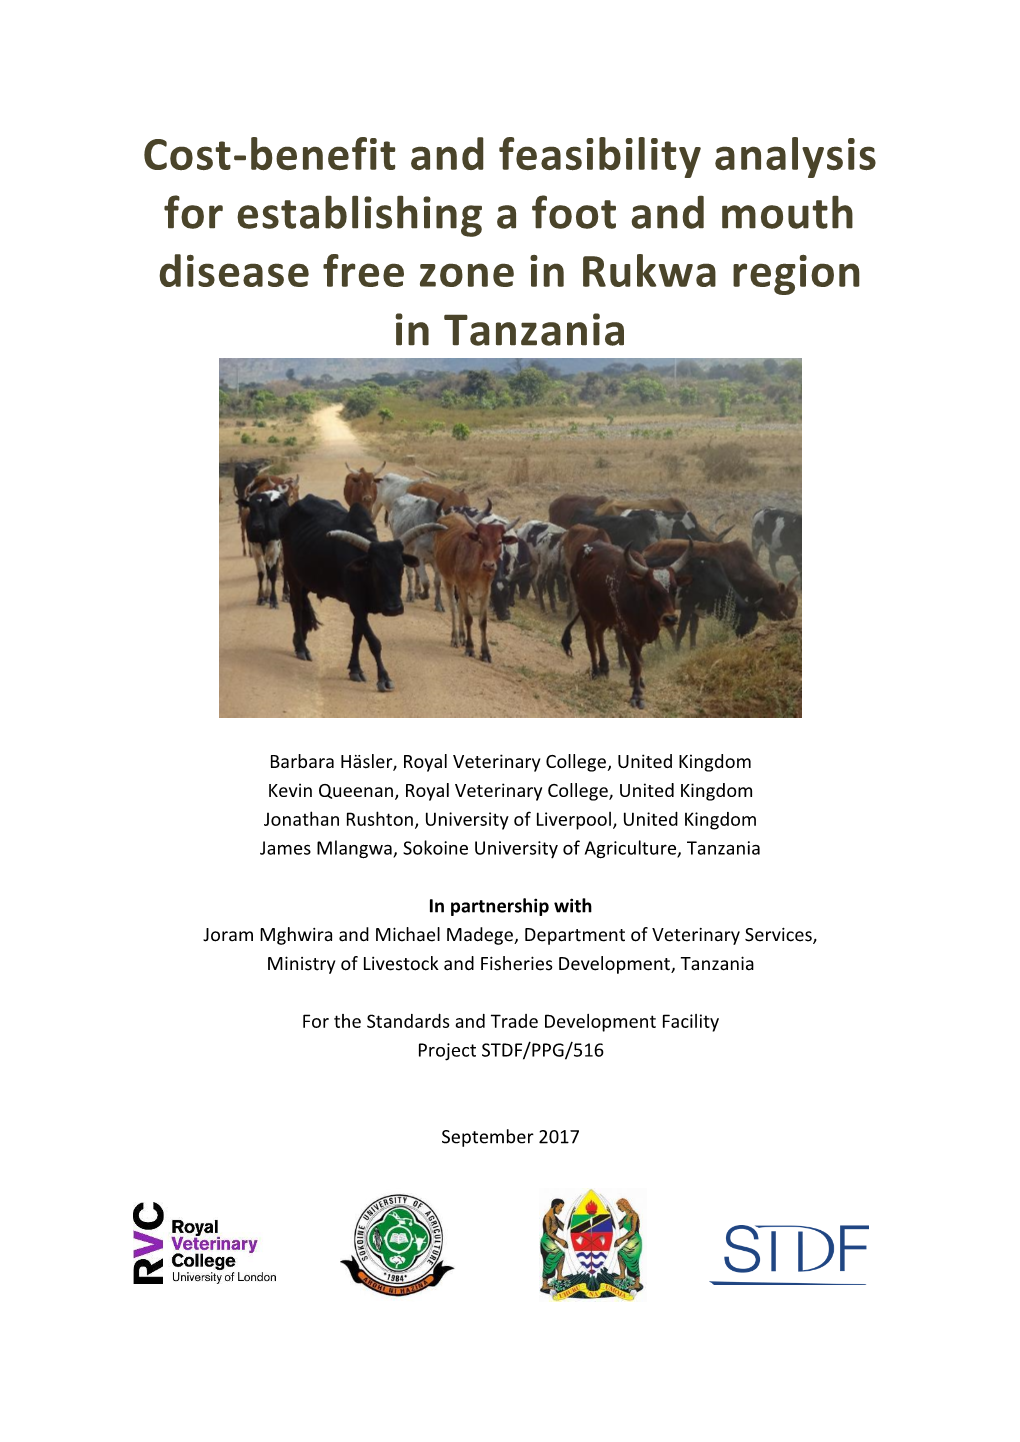 Cost-Benefit and Feasibility Analysis for Establishing a Foot and Mouth Disease Free Zone in Rukwa Region in Tanzania